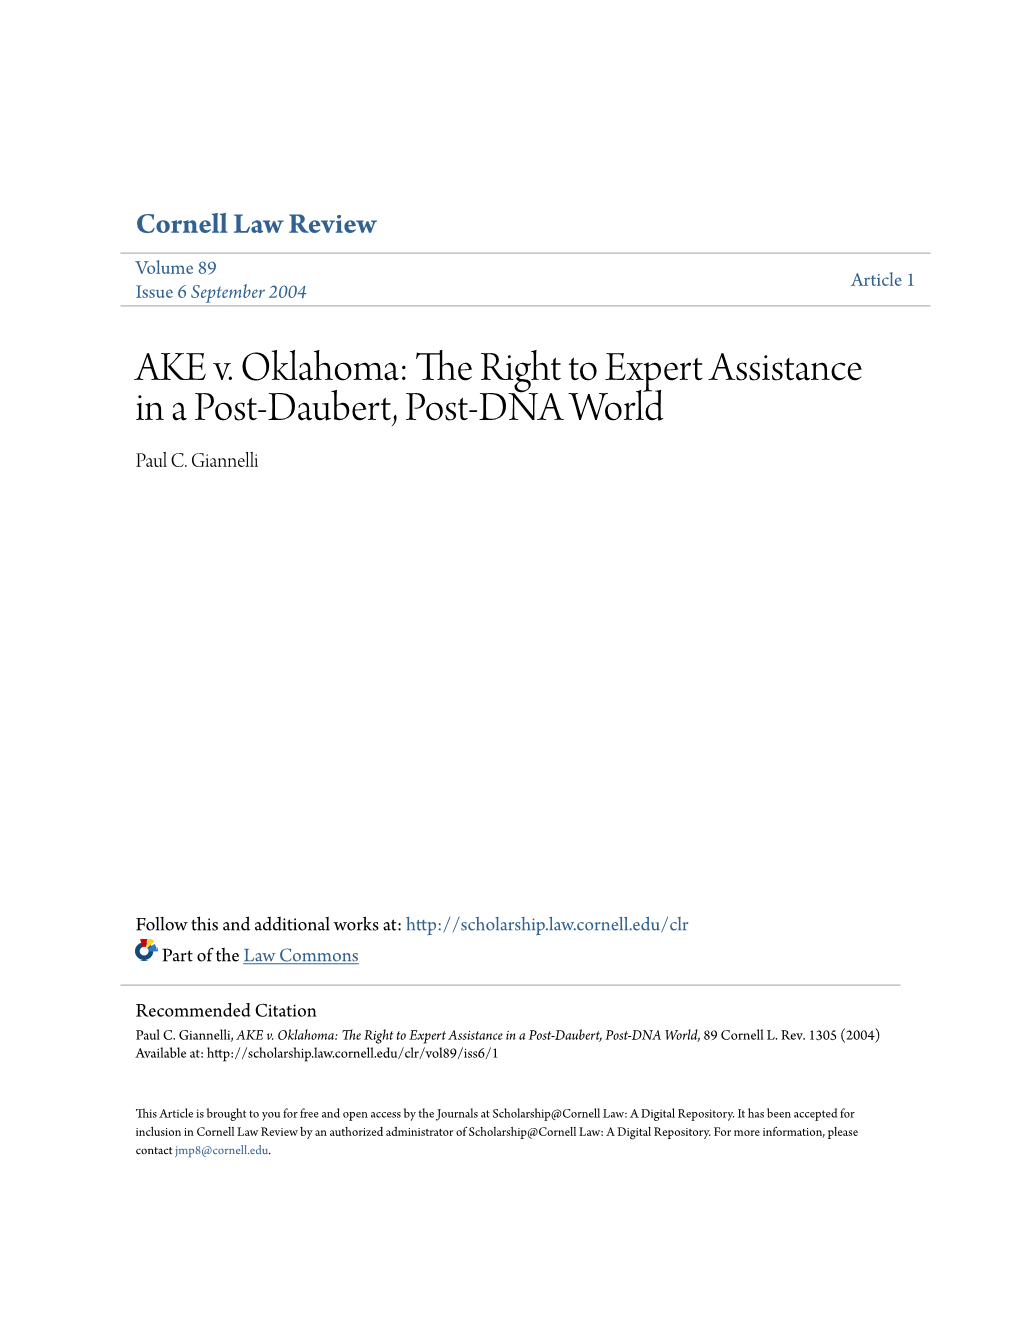 AKE V. Oklahoma: the Right to Expert Assistance in a Post-Daubert, Post-DNA World Paul C